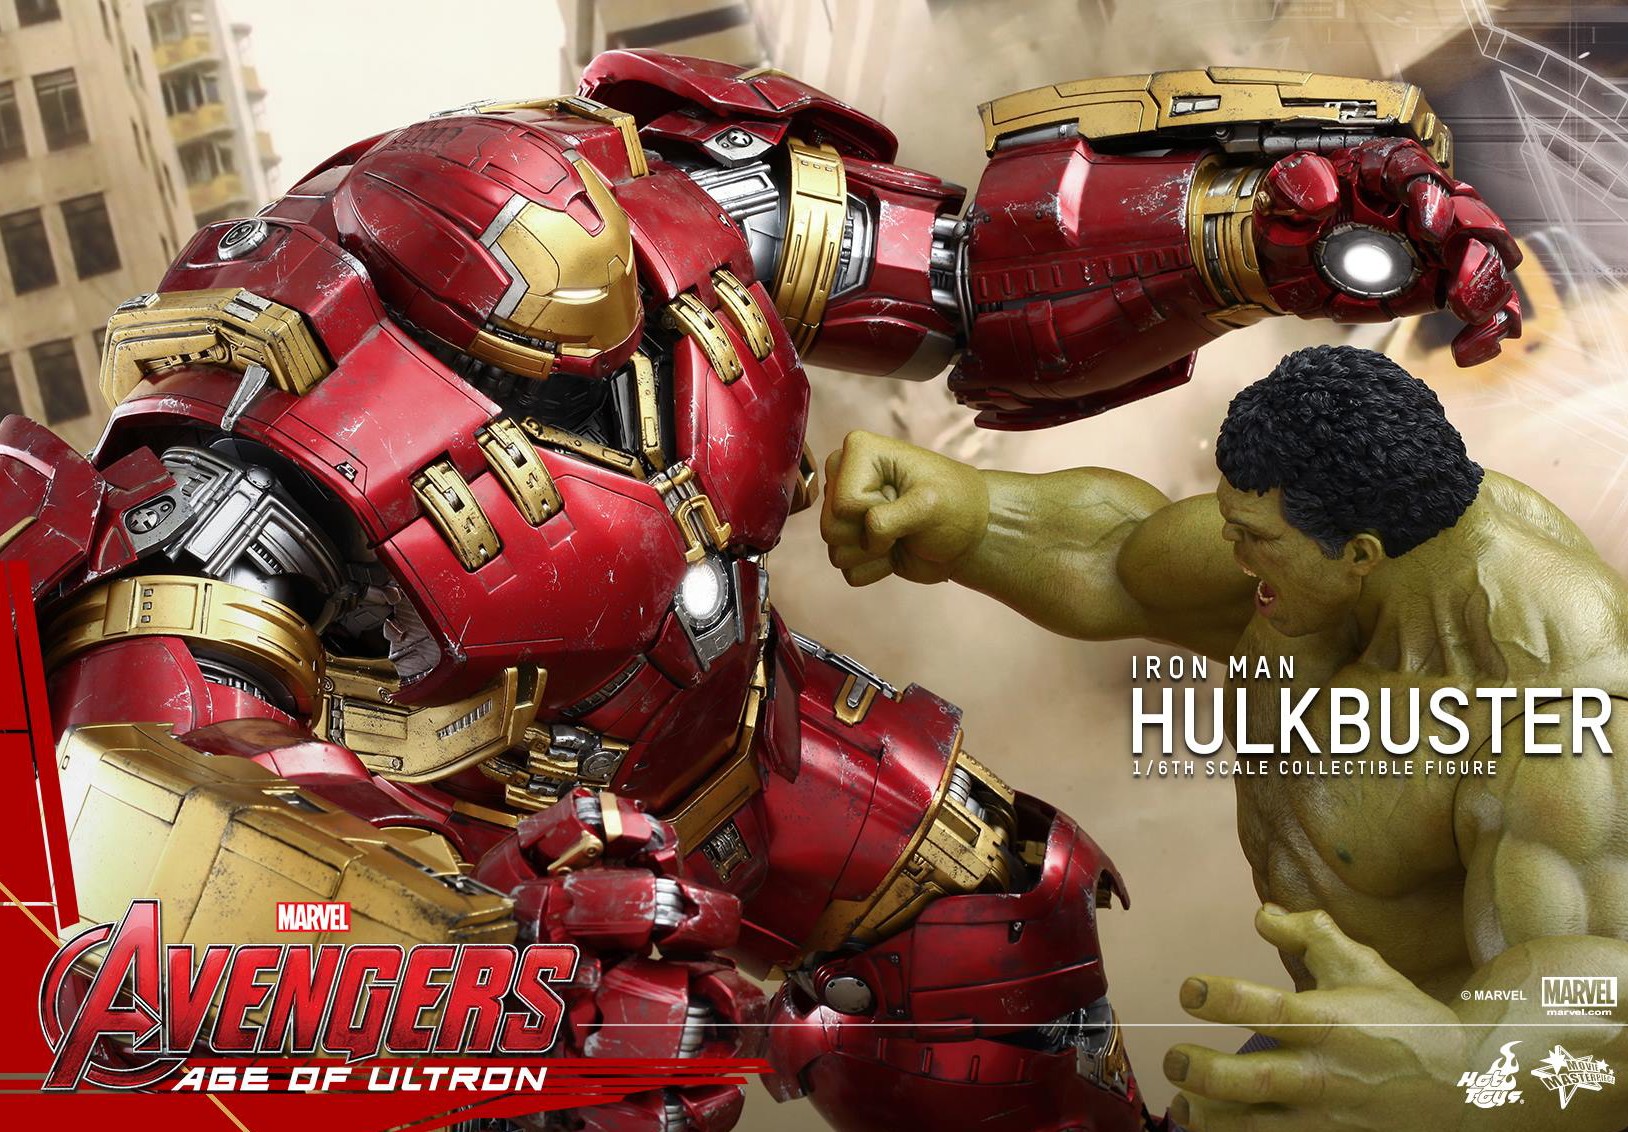 Iron Man Strikes In The Movie That This Hot Toys Hulkbuster